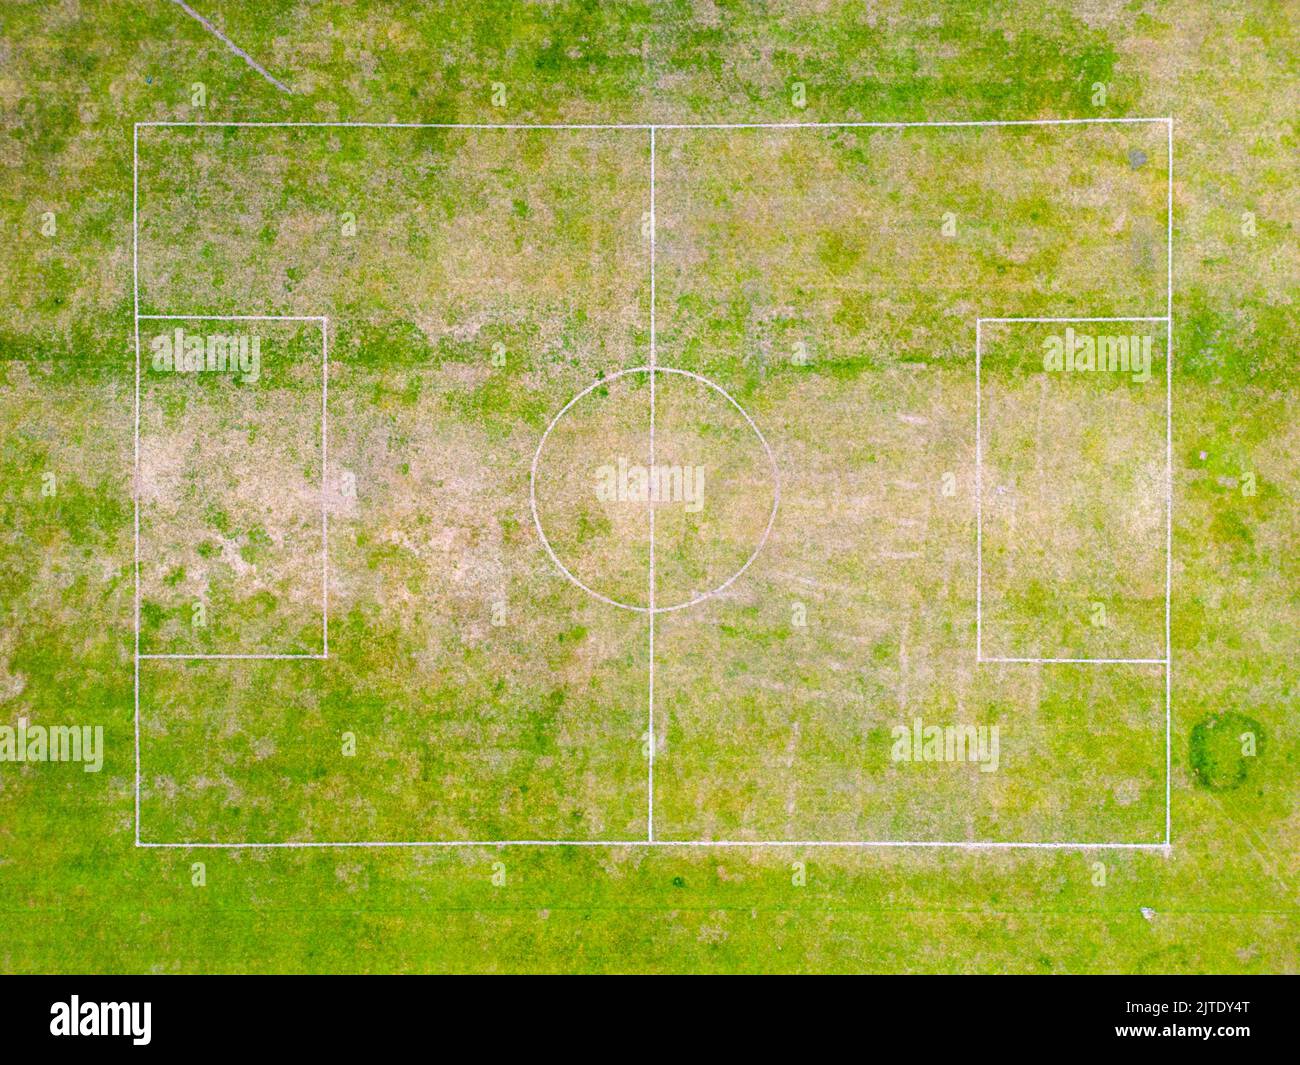 Aerial view of local football field Stock Photo